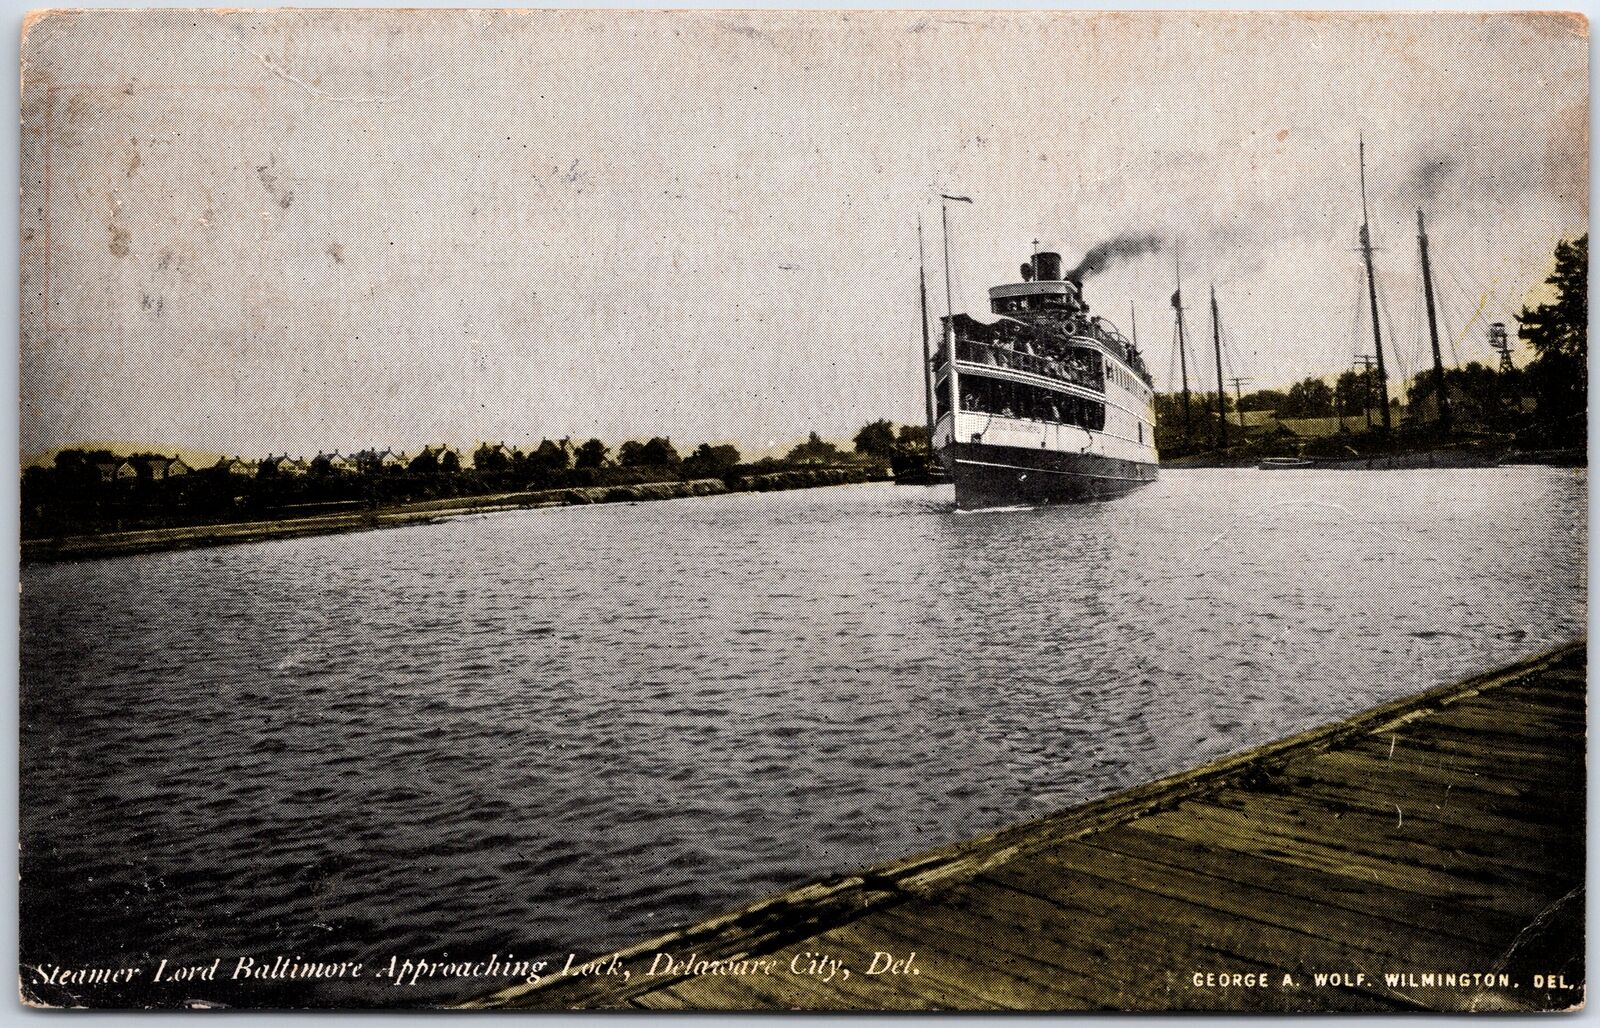 VINTAGE POSTCARD LORD BALTIMORE STEAMER APPROACHING DELAWARE CITY DELAWARE 1906